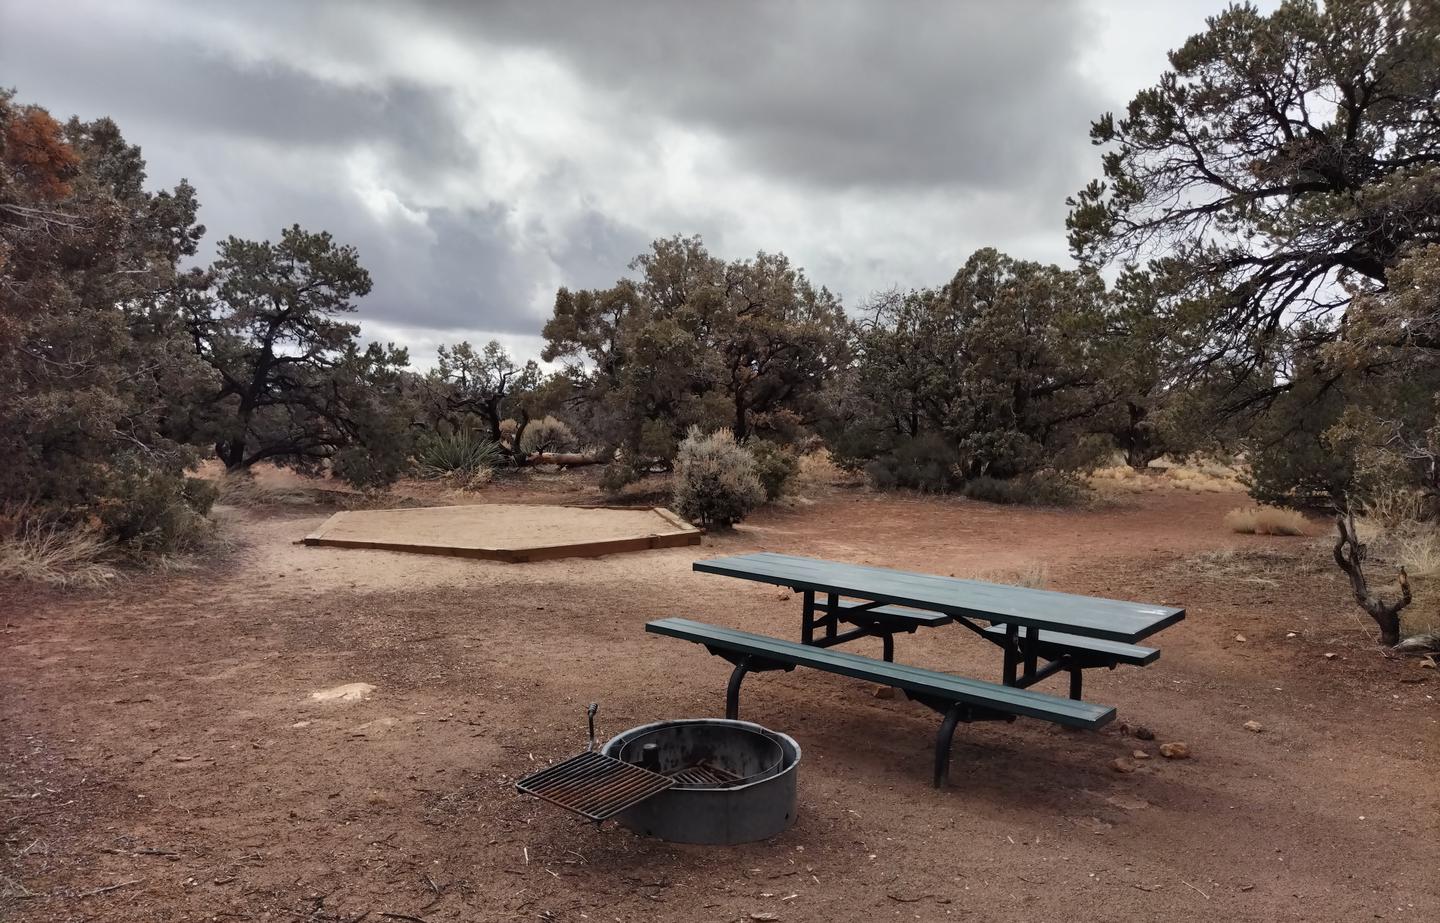 Picnic table, metal fire ring, and tent pad at Site 12.Site 12 has a tent pad, a picnic table and a metal fire ring. The site is surrounded by a pinon-juniper forest.